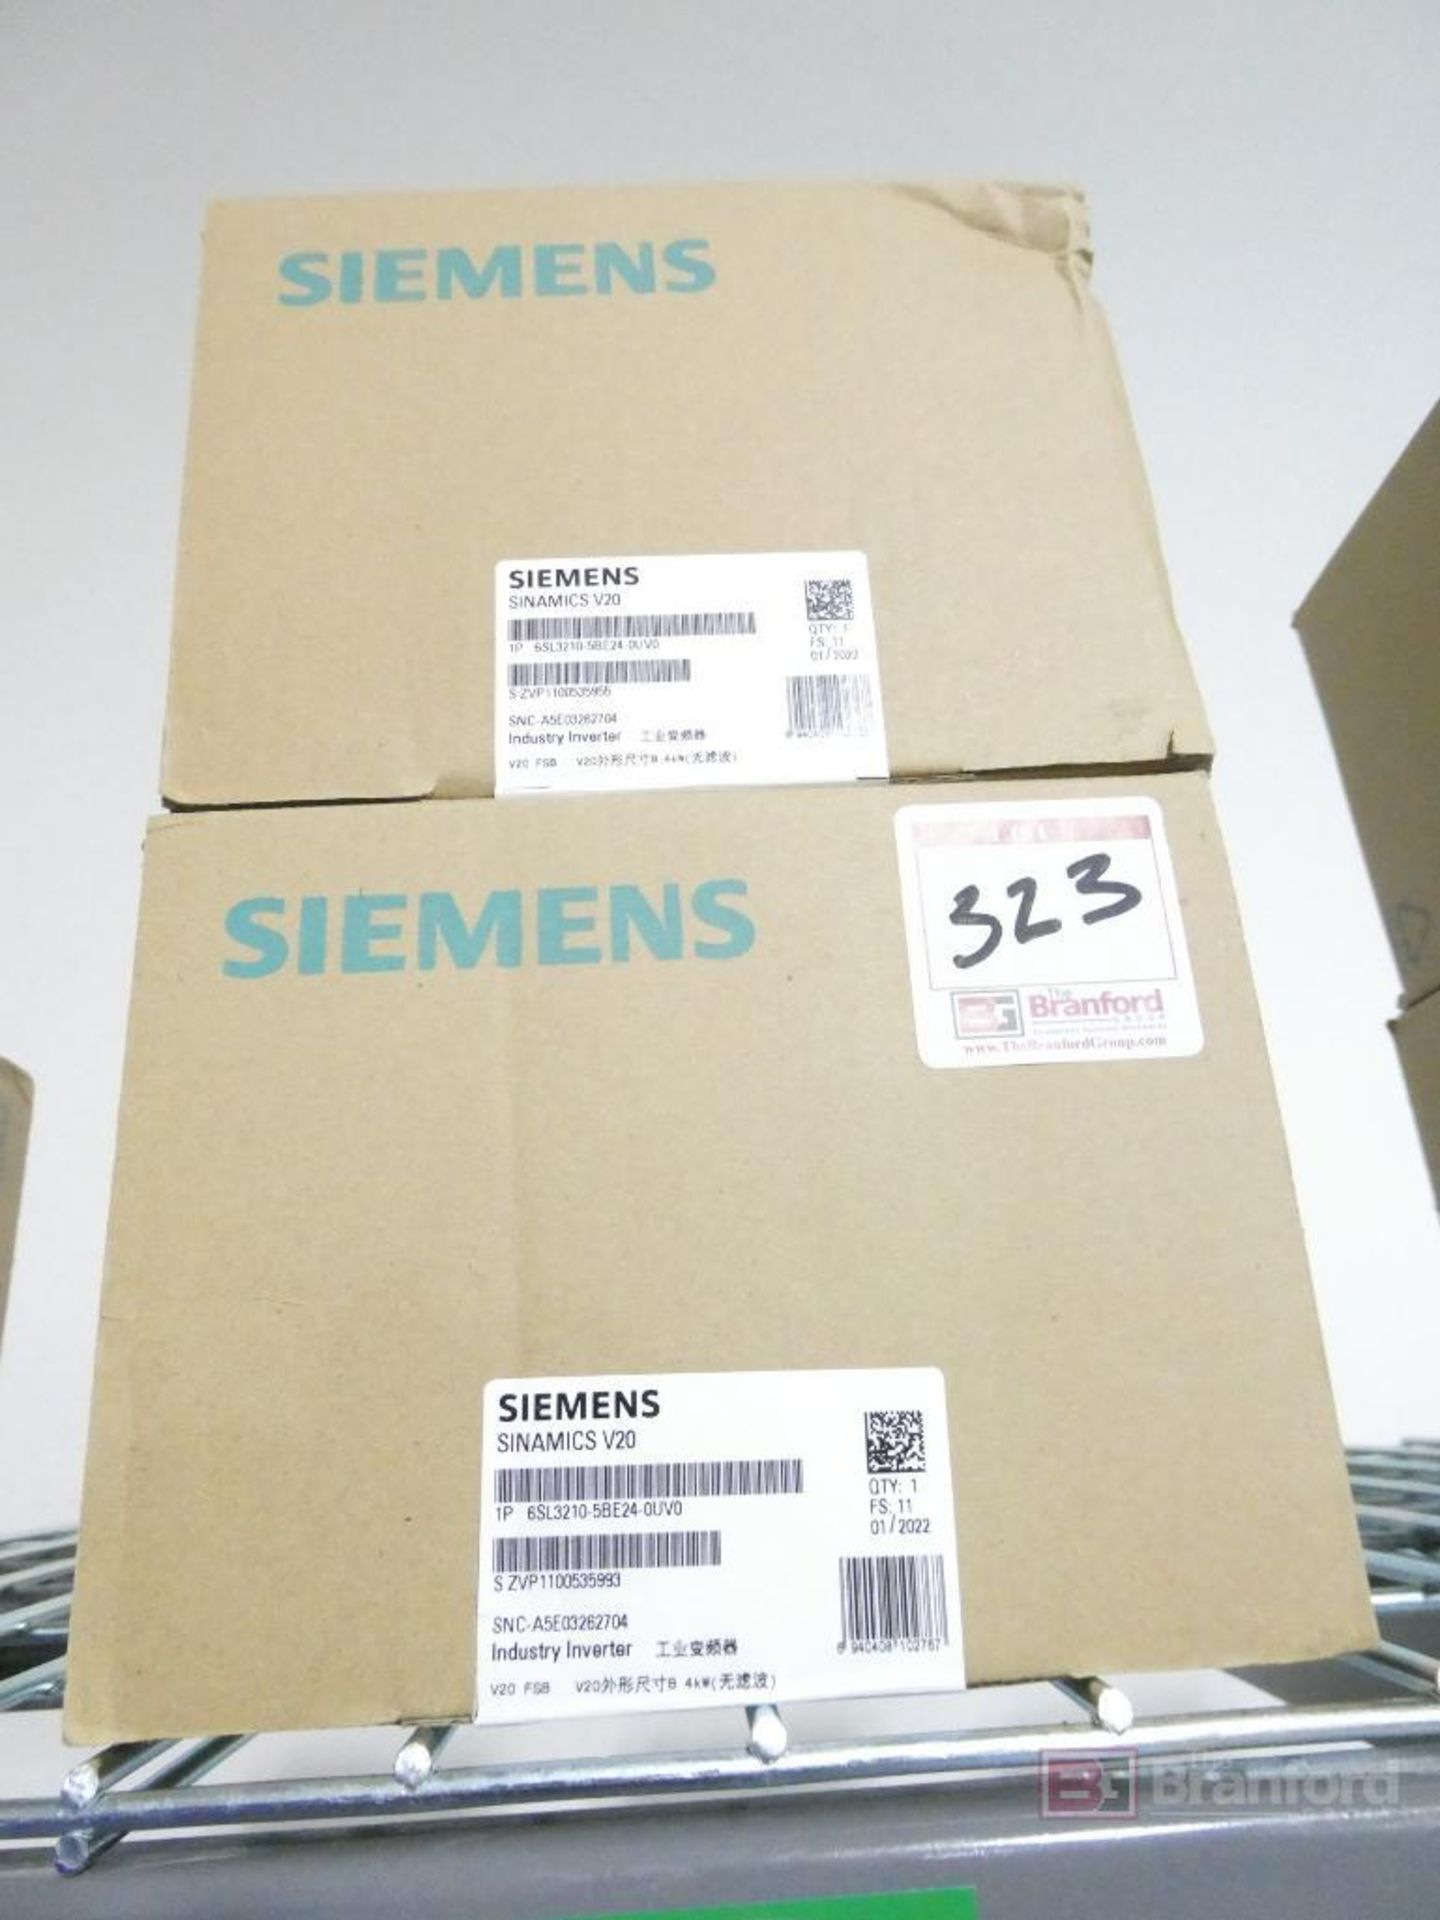 (2) Siemens Sinamics V20, Variable Frequency Drives (New)